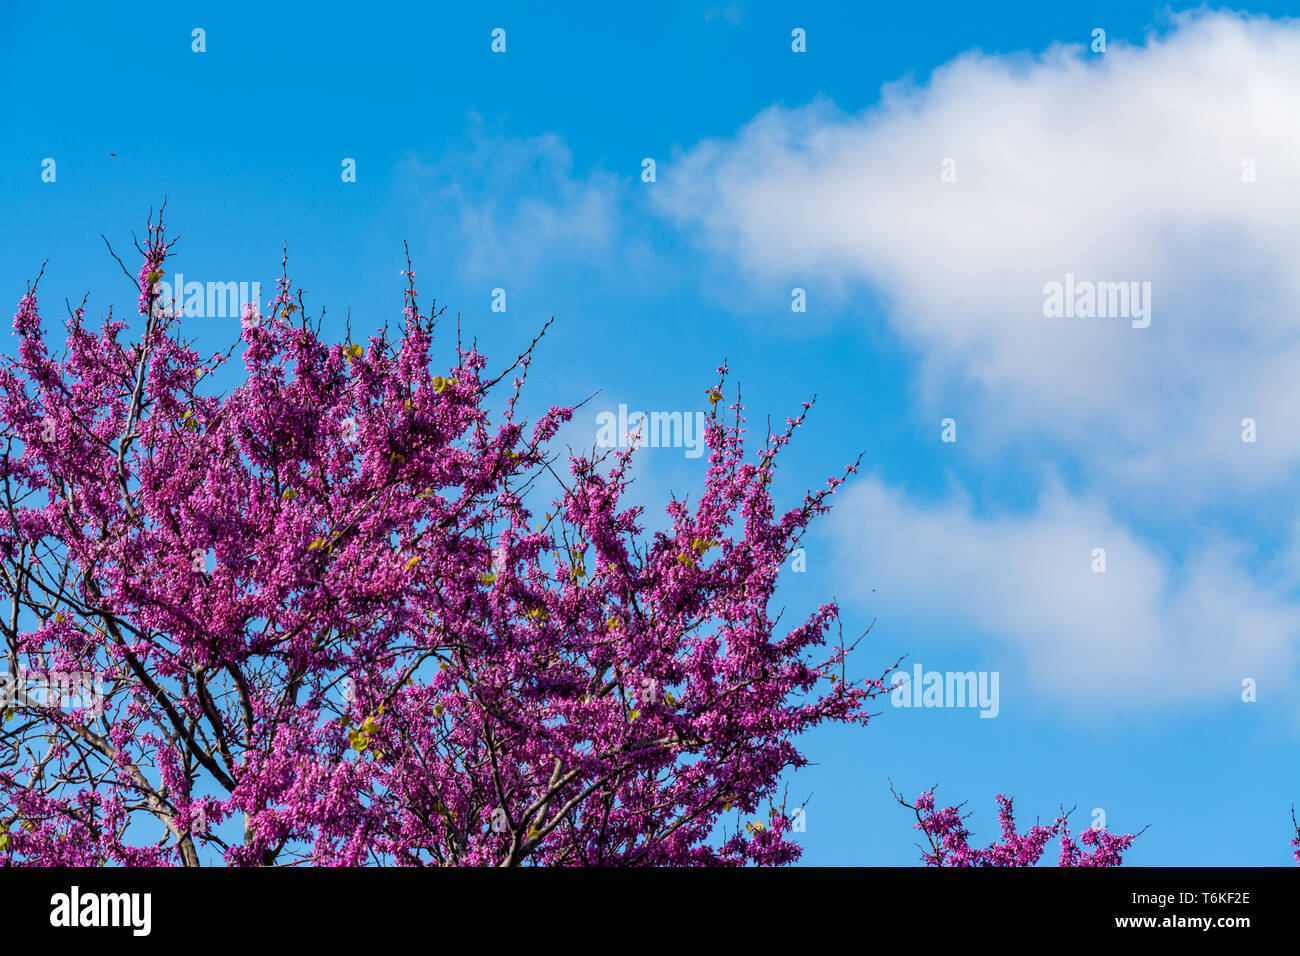 Blooming redbud tree under the blue and cloudy sky of spring Stock Photo